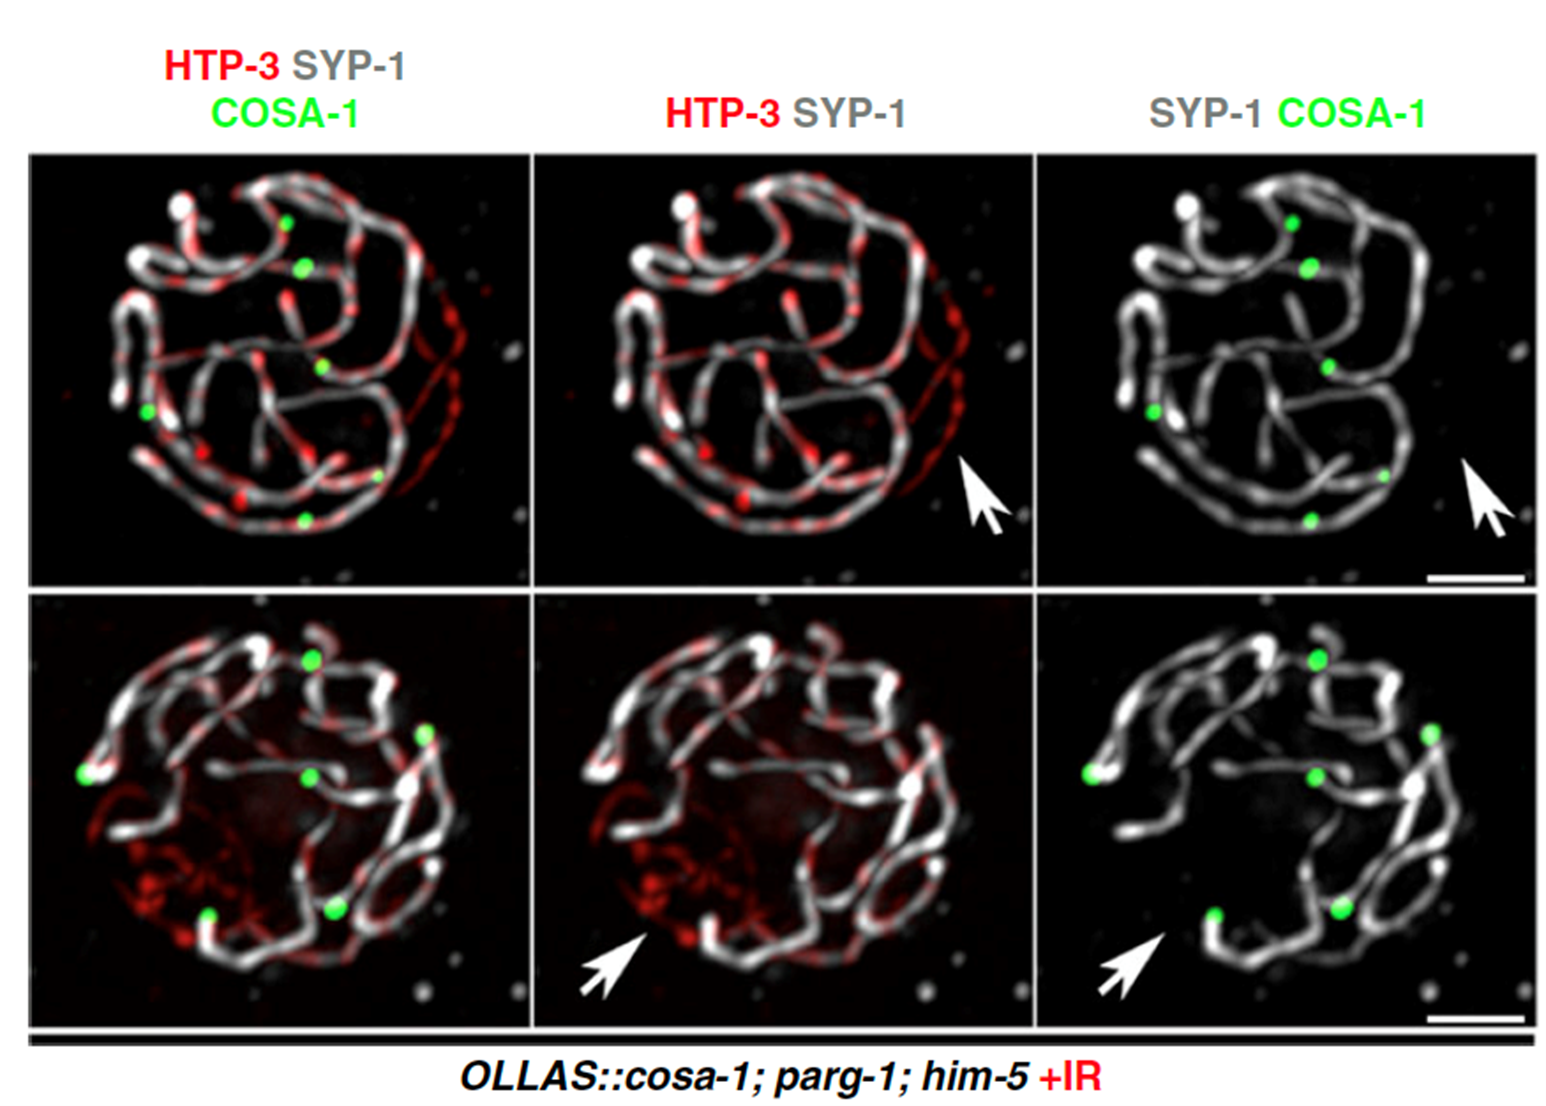 Image 2: Oocytes stained for different SC subunits and the crossover sites in mutants with reduced DSBs, after irradiation. From Janisiw et al.; Nature Communications, 2020.